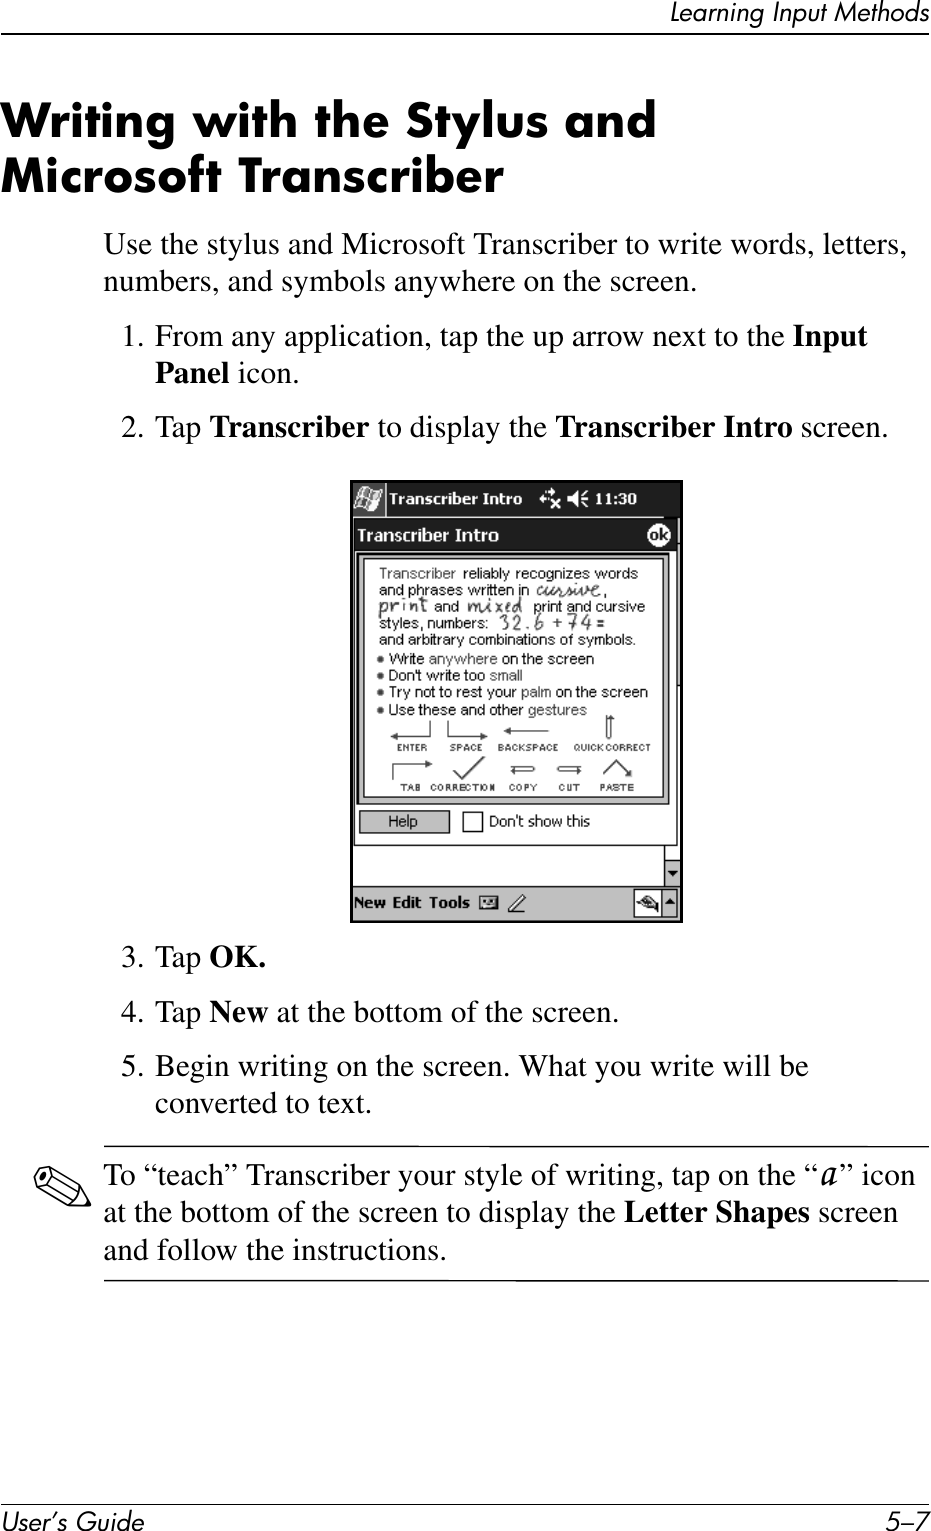 Learning Input MethodsUser’s Guide 5–7Writing with the Stylus and Microsoft Transcriber Use the stylus and Microsoft Transcriber to write words, letters, numbers, and symbols anywhere on the screen.1. From any application, tap the up arrow next to the Input Panel icon.2. Tap Transcriber to display the Transcriber Intro screen.3. Tap OK.4. Tap New at the bottom of the screen.5. Begin writing on the screen. What you write will be converted to text.✎To “teach” Transcriber your style of writing, tap on the “a ” icon at the bottom of the screen to display the Letter Shapes screen and follow the instructions.